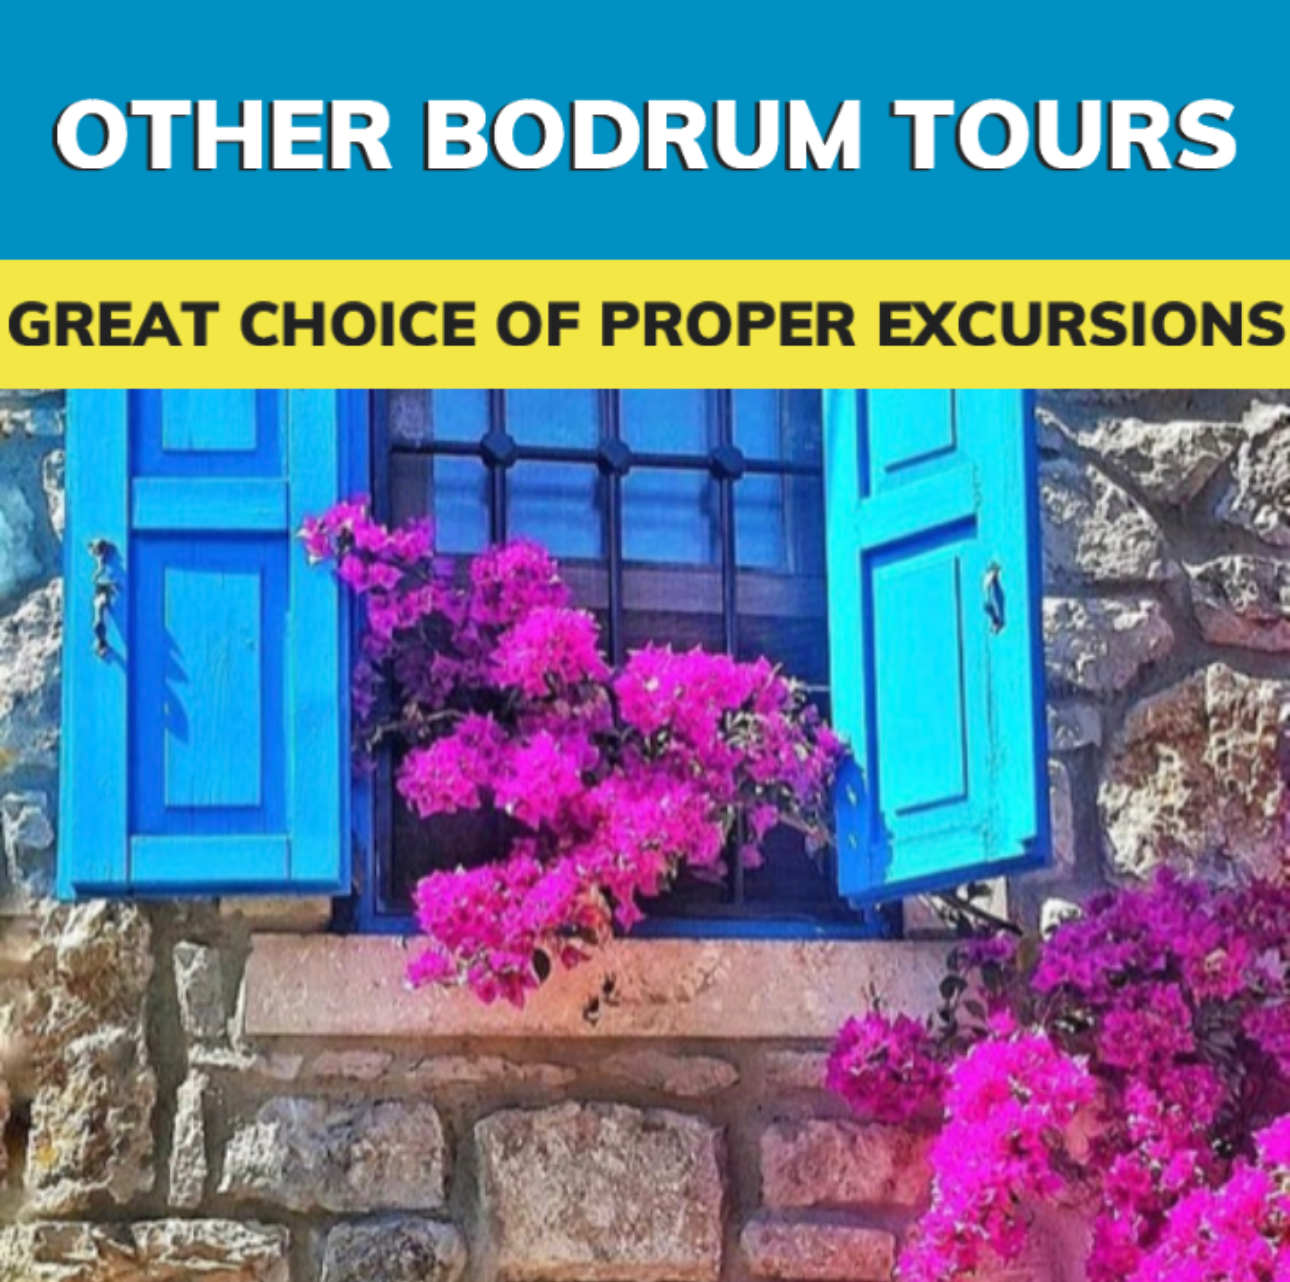 All Bodrum Tours and Bodrum Excursions